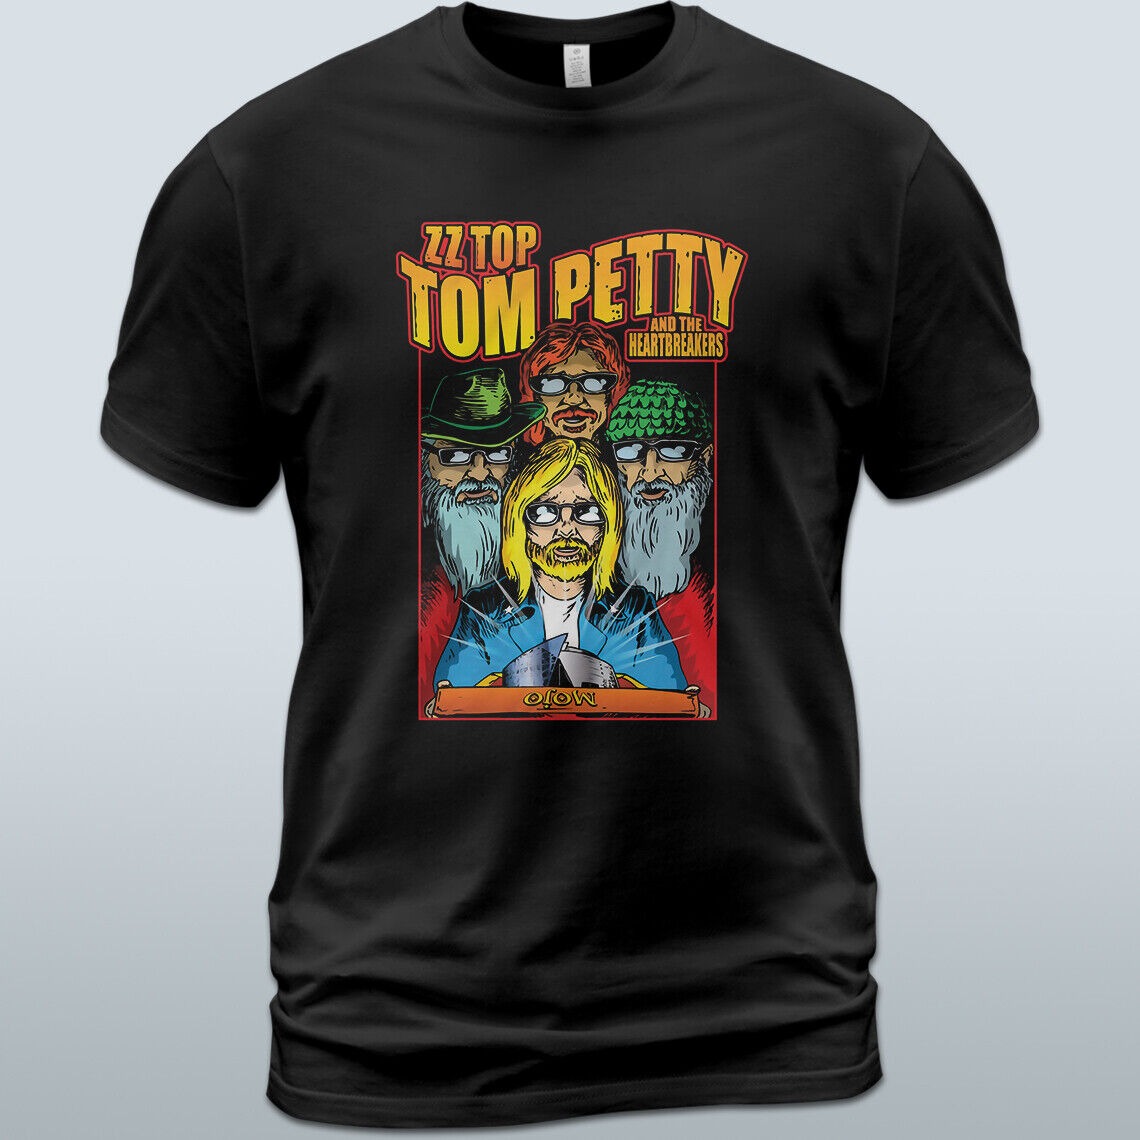 Cotton T-Shirt Tom Petty and the Heartbreakers Long After Dark Album Tee